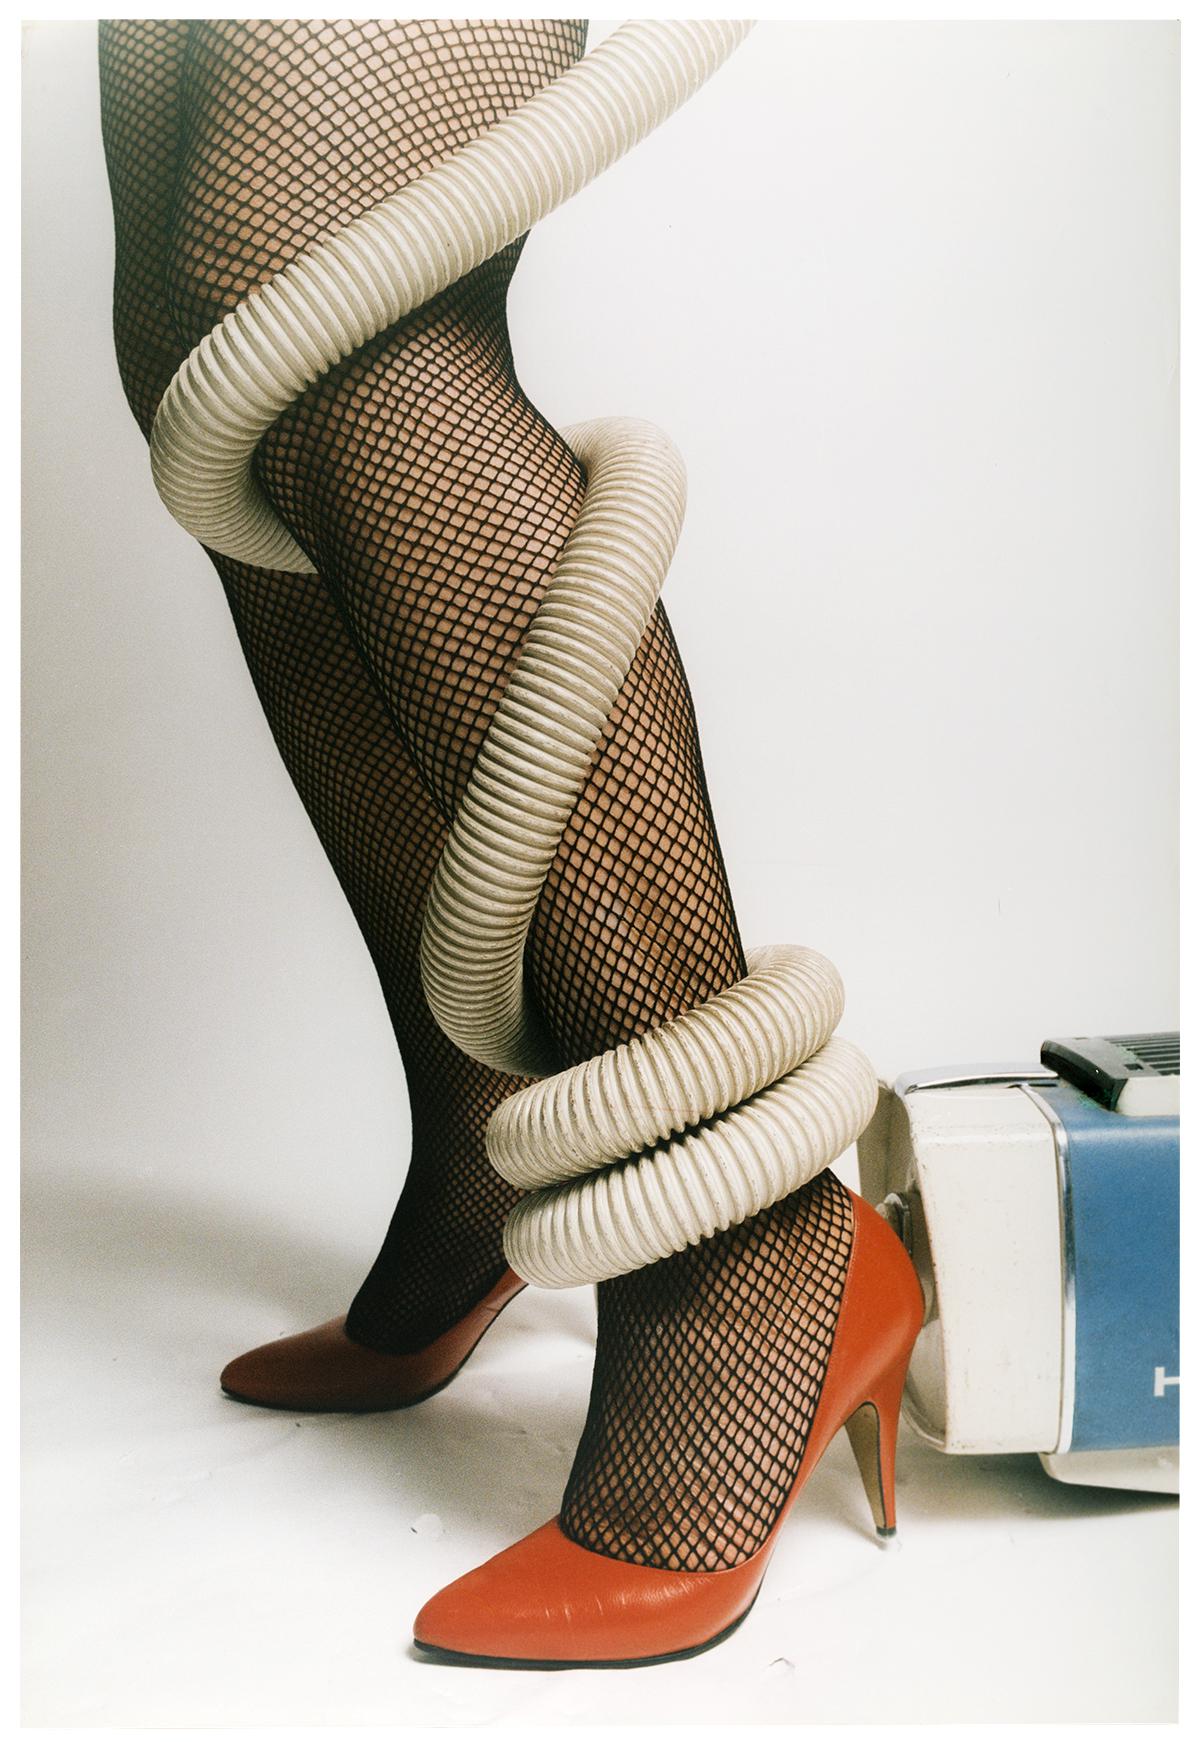 Photo of a vacuum hose wrapped around a woman's leg wearing fishnet stockings and orange heels.